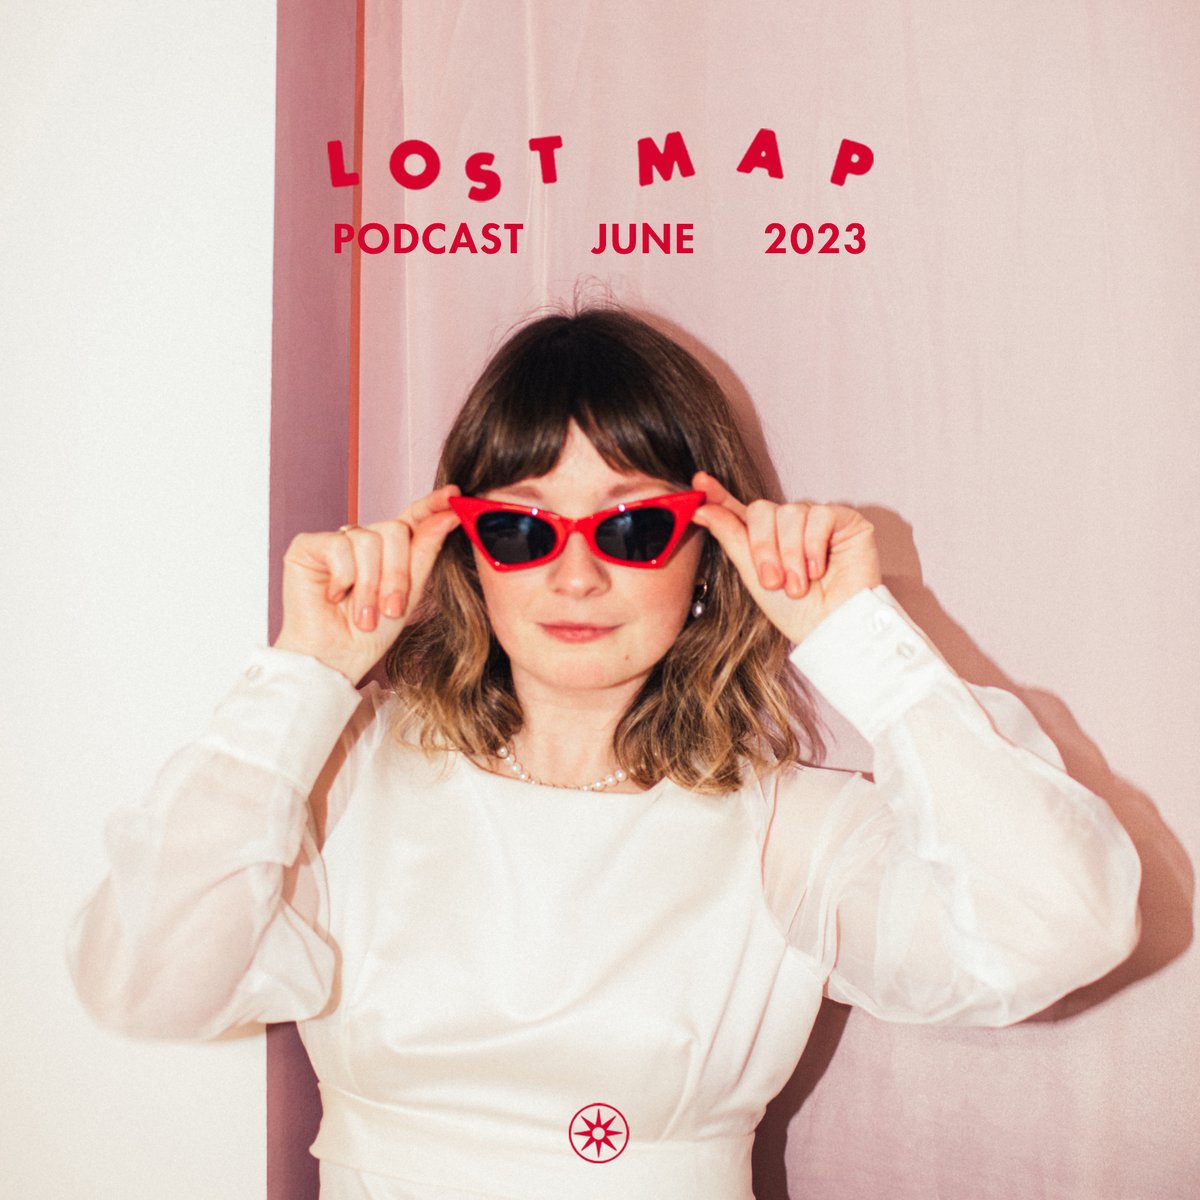 GASP! It's the LOST MAP PODCAST! All the latest label news delivered with typical panache by @pictishtrail & @dohoodle. 🌟 Full interview with @MarthaFfion on new album 'The Wringer' 🌟 New music from SULKA @makeness & @freelove_nrg Streaming now: 🎧 linktr.ee/lostmap